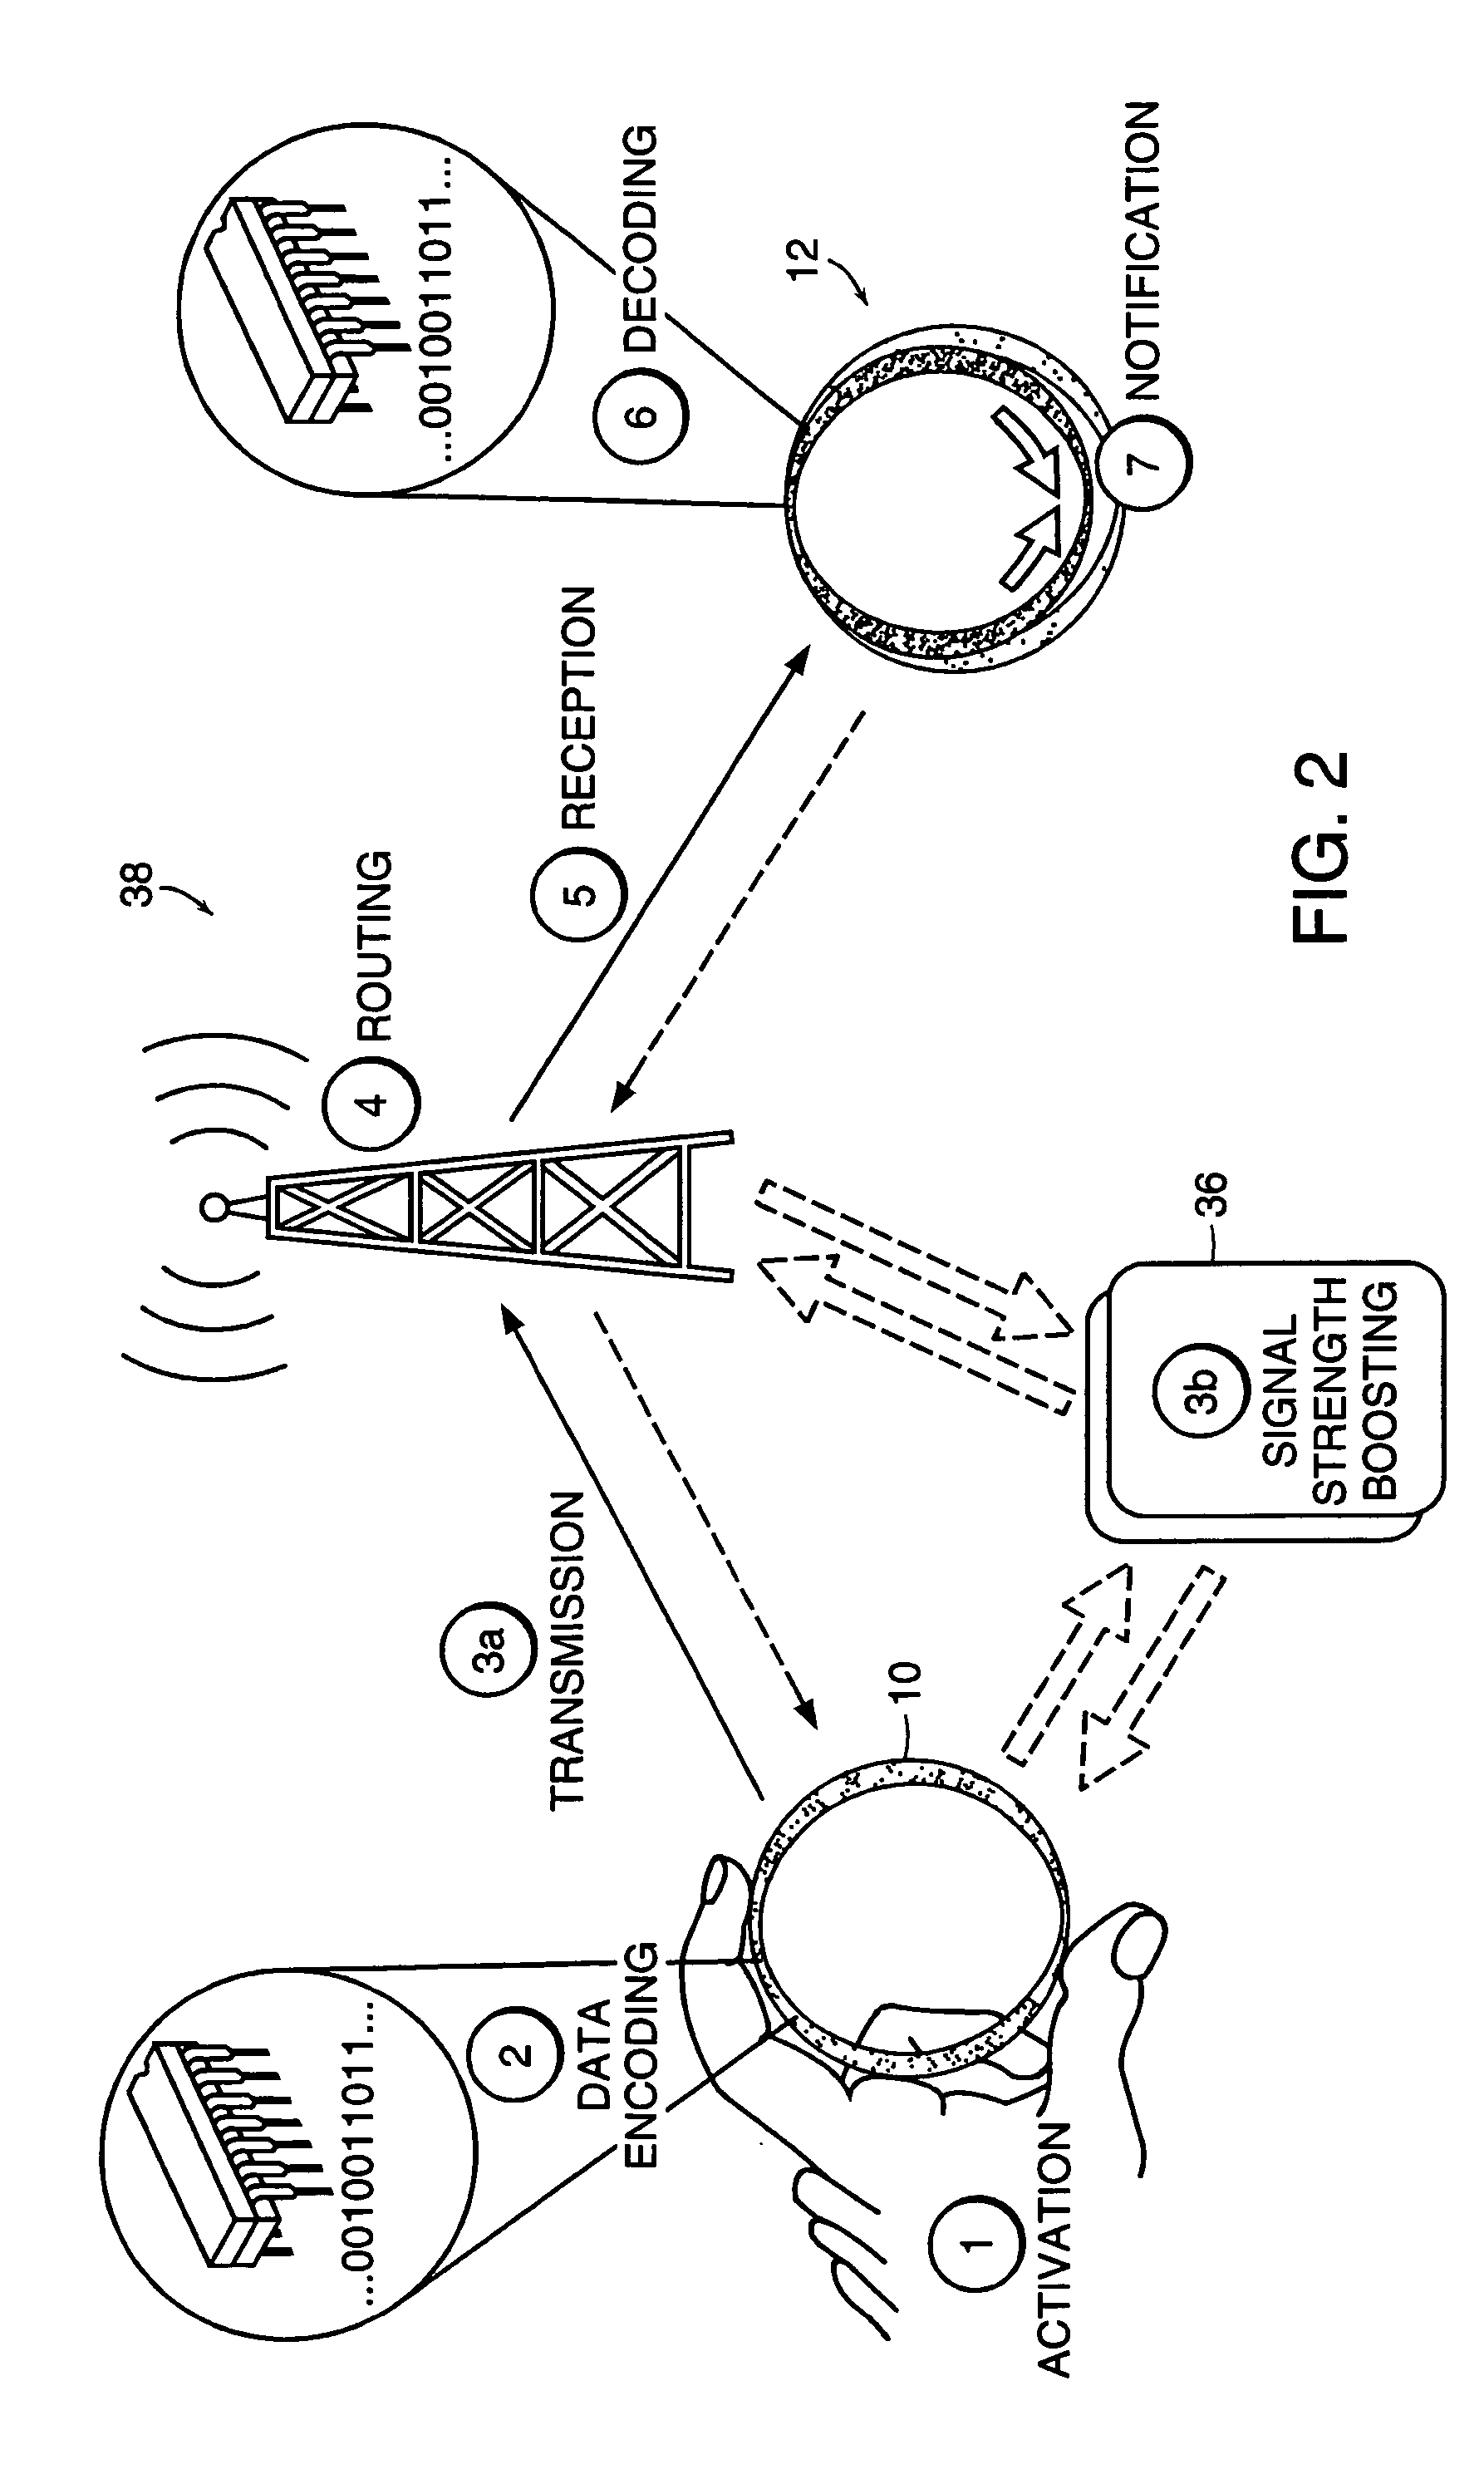 State adaption devices and methods for wireless communications